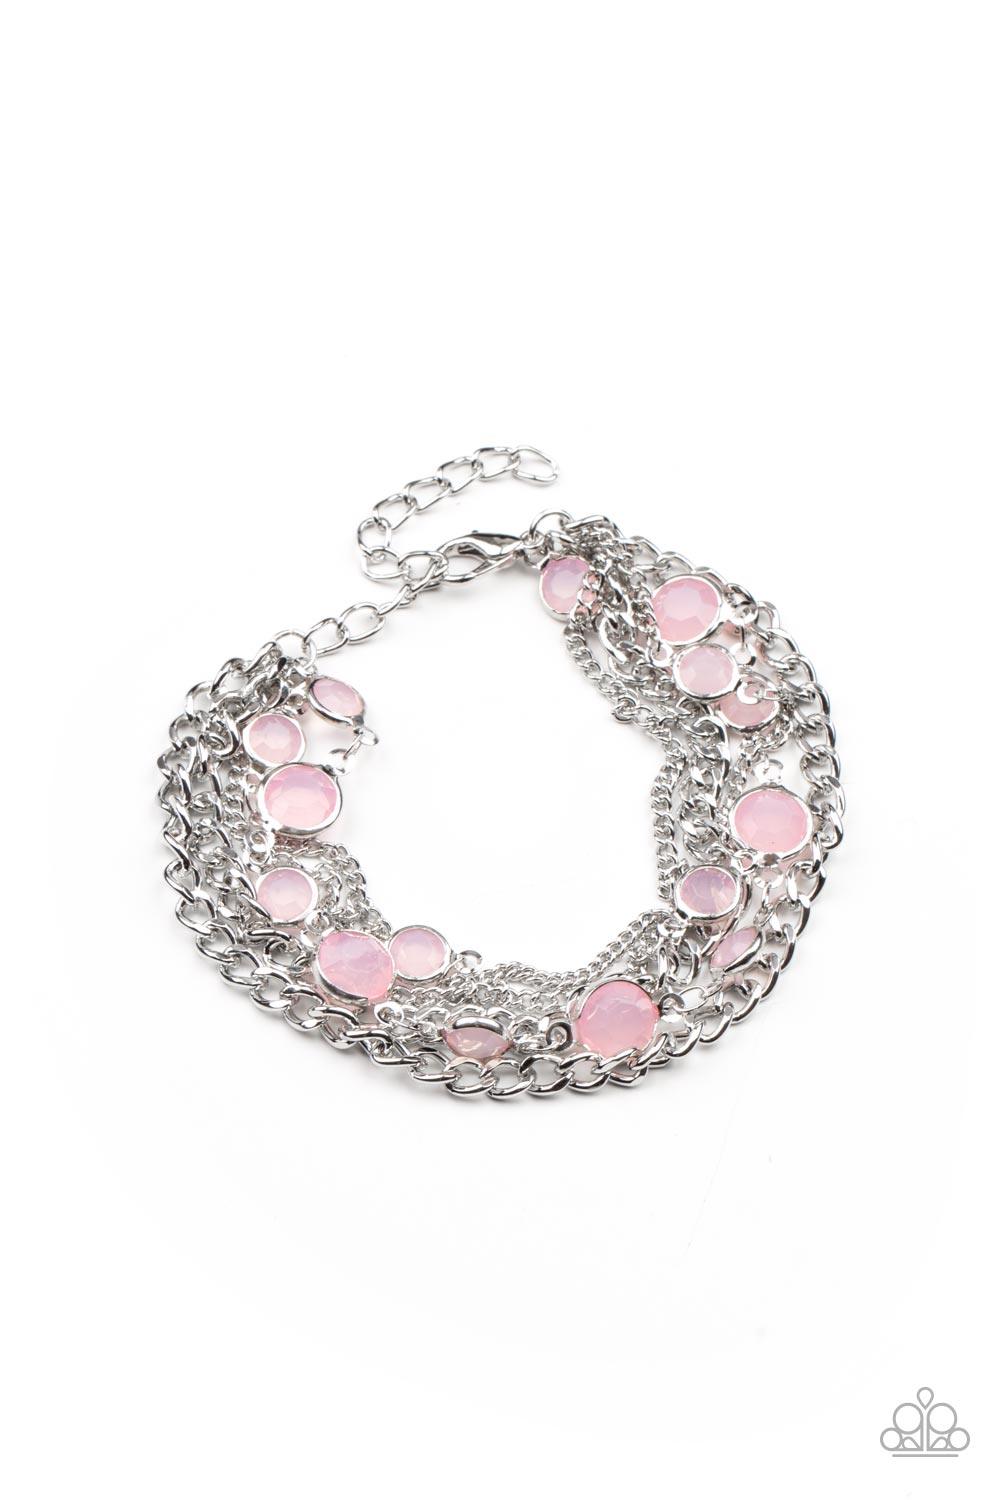 Paparazzi Accessories Glossy Goddess - Pink Infused with glassy Pale Rosette beaded strands, layers of mismatched silver chains drape around the wrist for an ethereal pop of color. Features an adjustable clasp closure. Sold as one individual bracelet. Jew